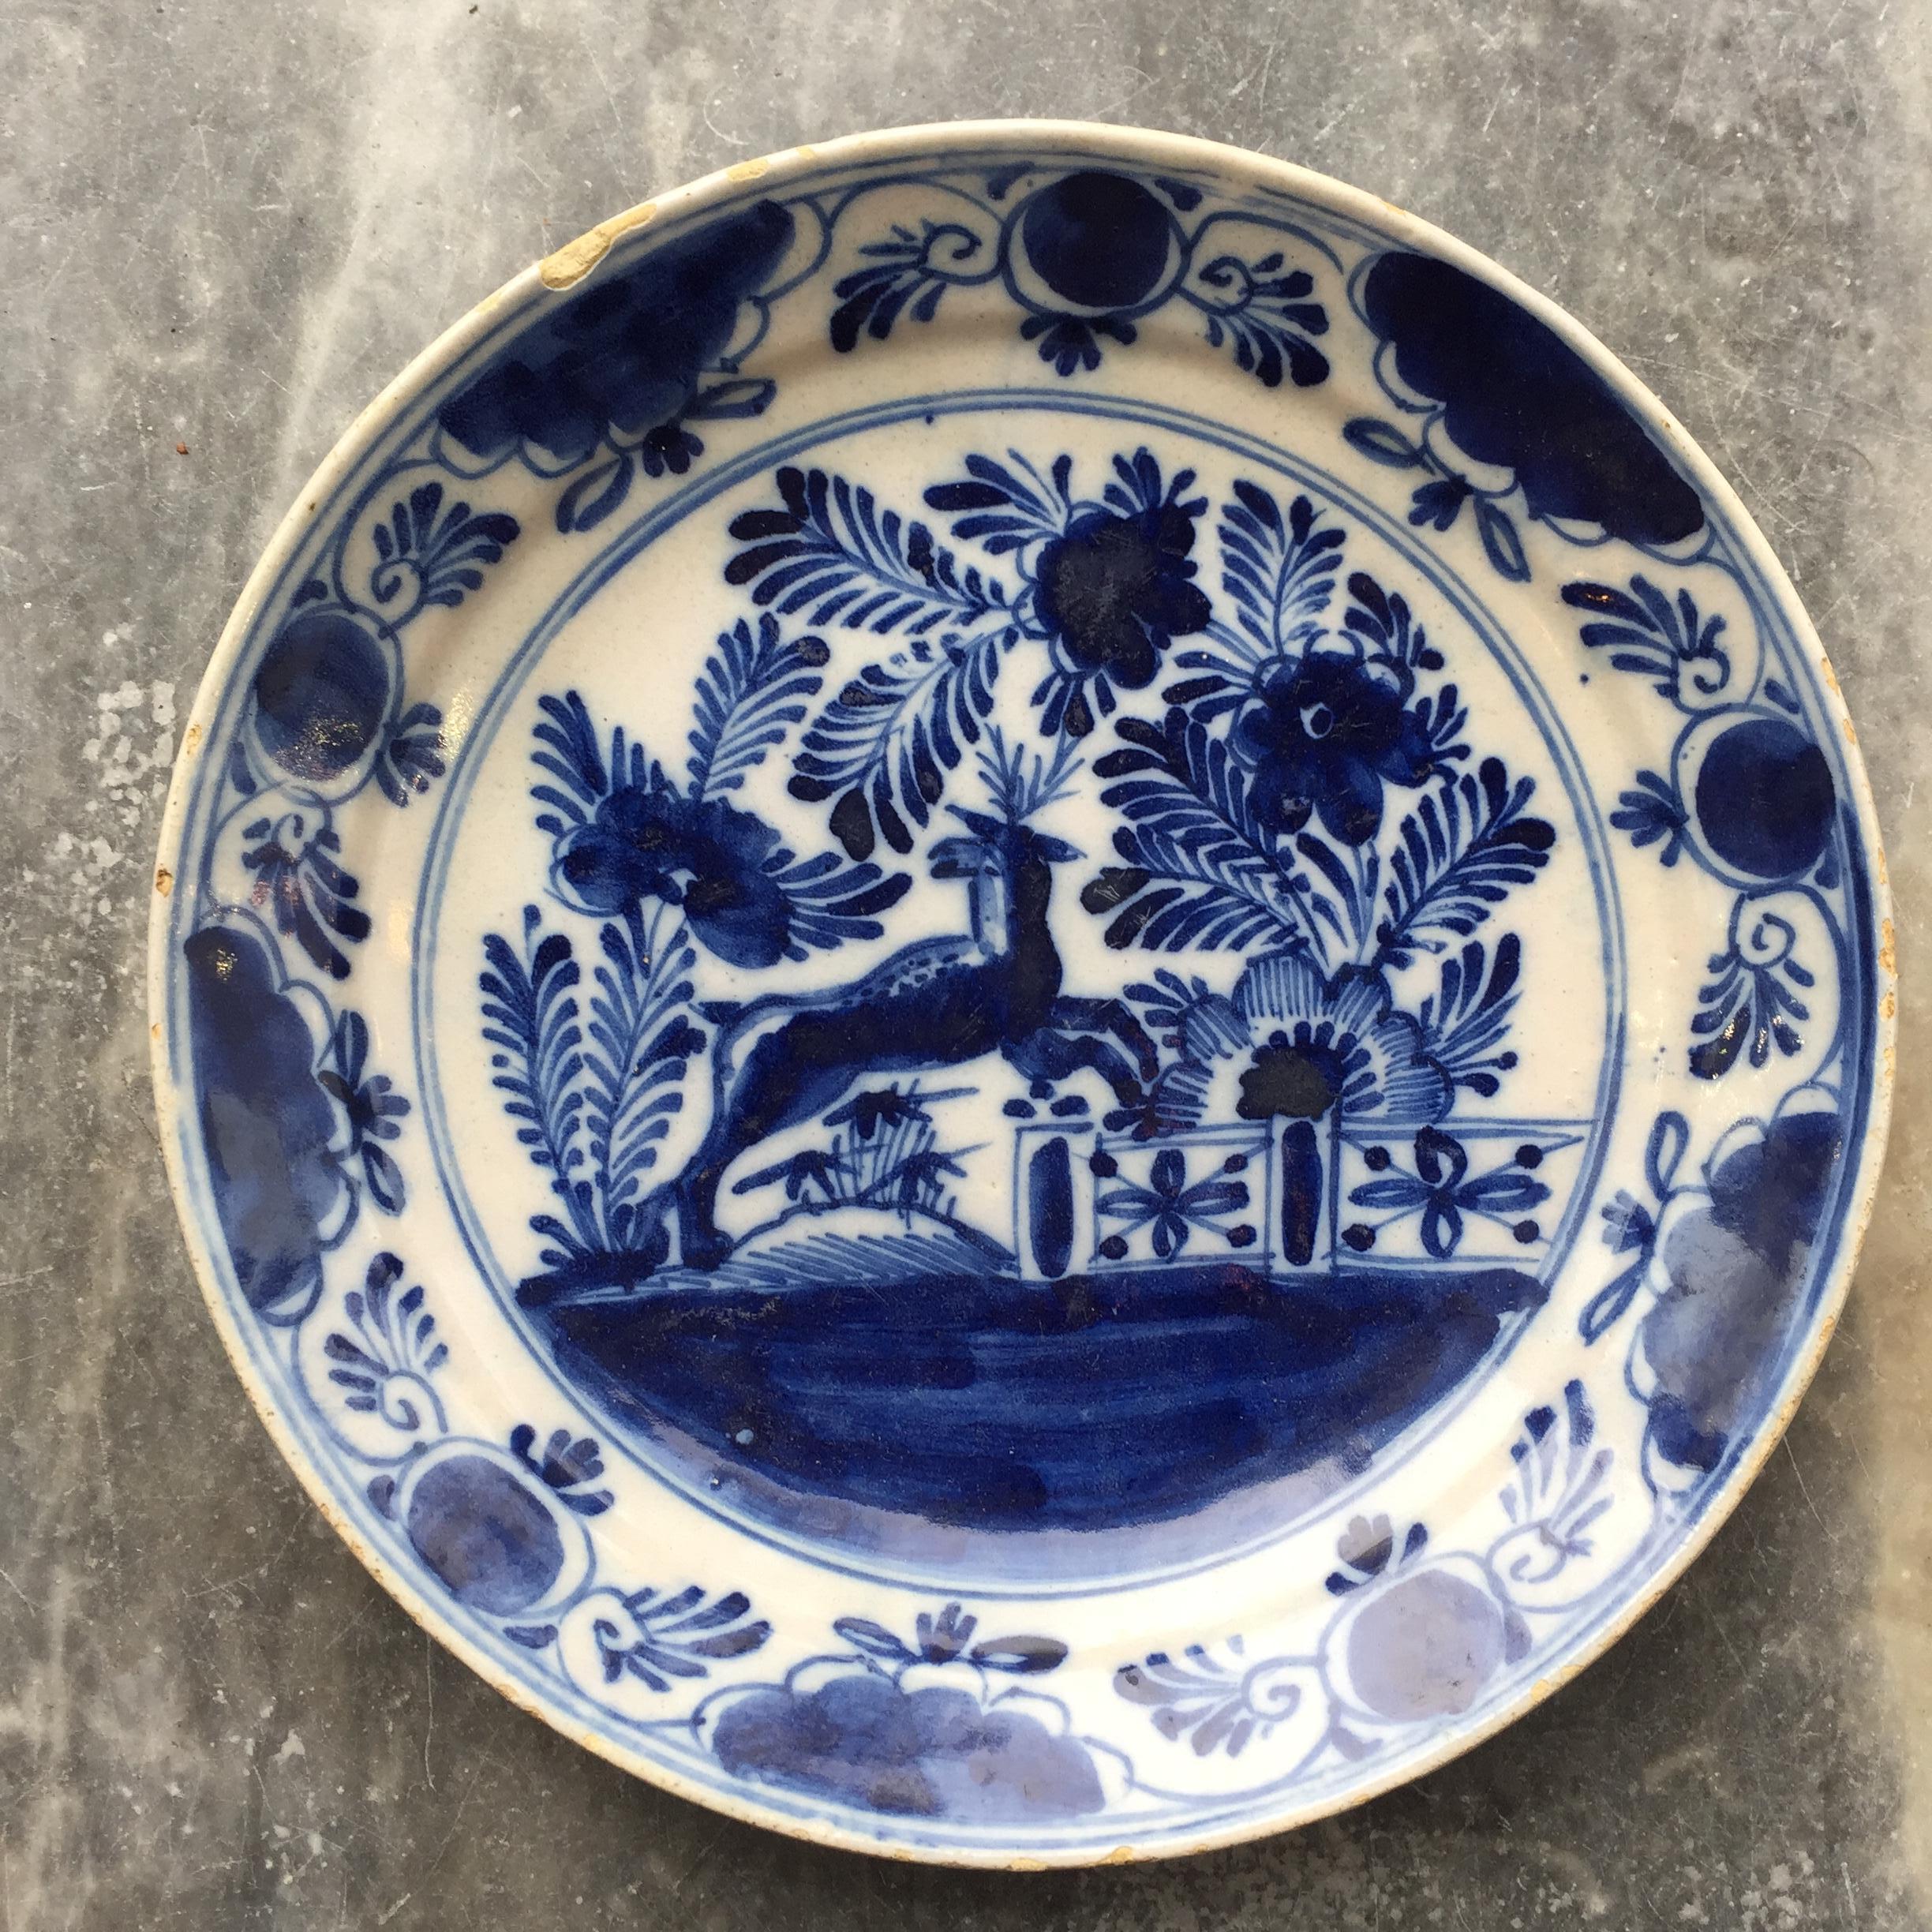 City: Delft
Workshop: Unknown
Date: second half of the 18th century

A blue and white Dutch Delft plate with the decoration of a deer in a garden. 

Unmarked.